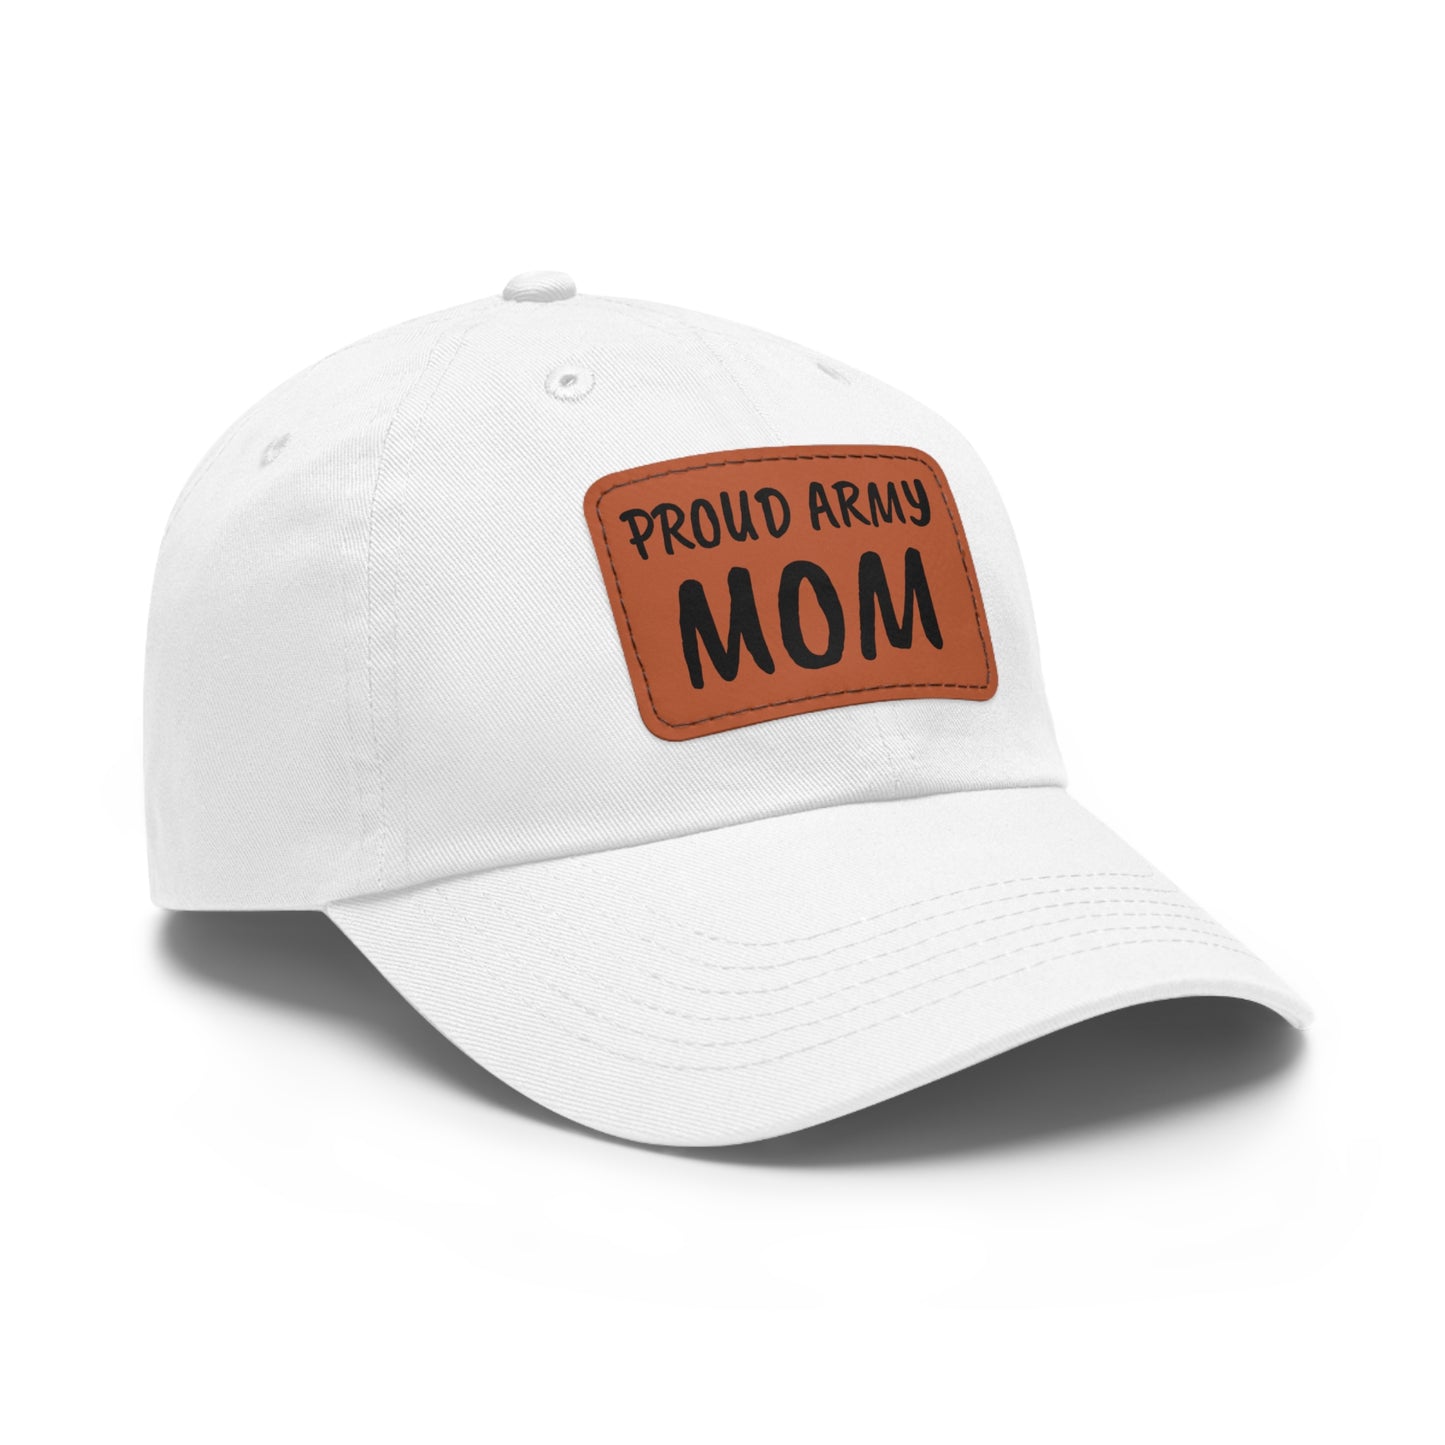 Proud Army Mom Hat with Leather Patch